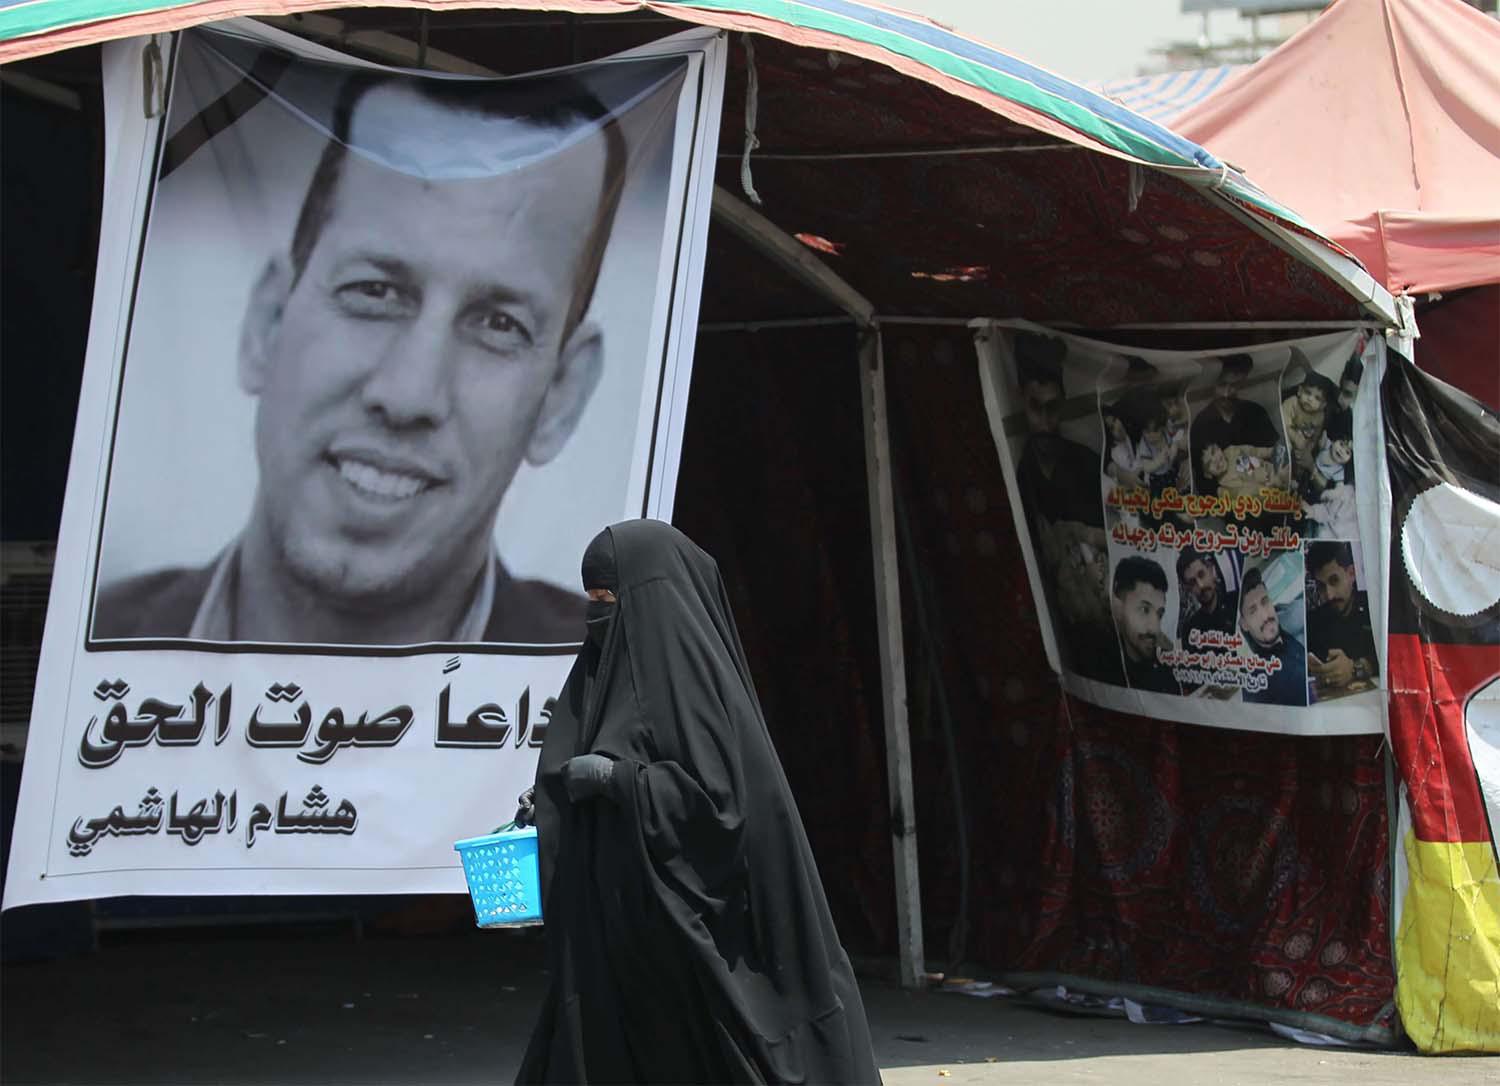 Some experts have voiced fear of renewed unrest in Iraq after hashemi's assassination